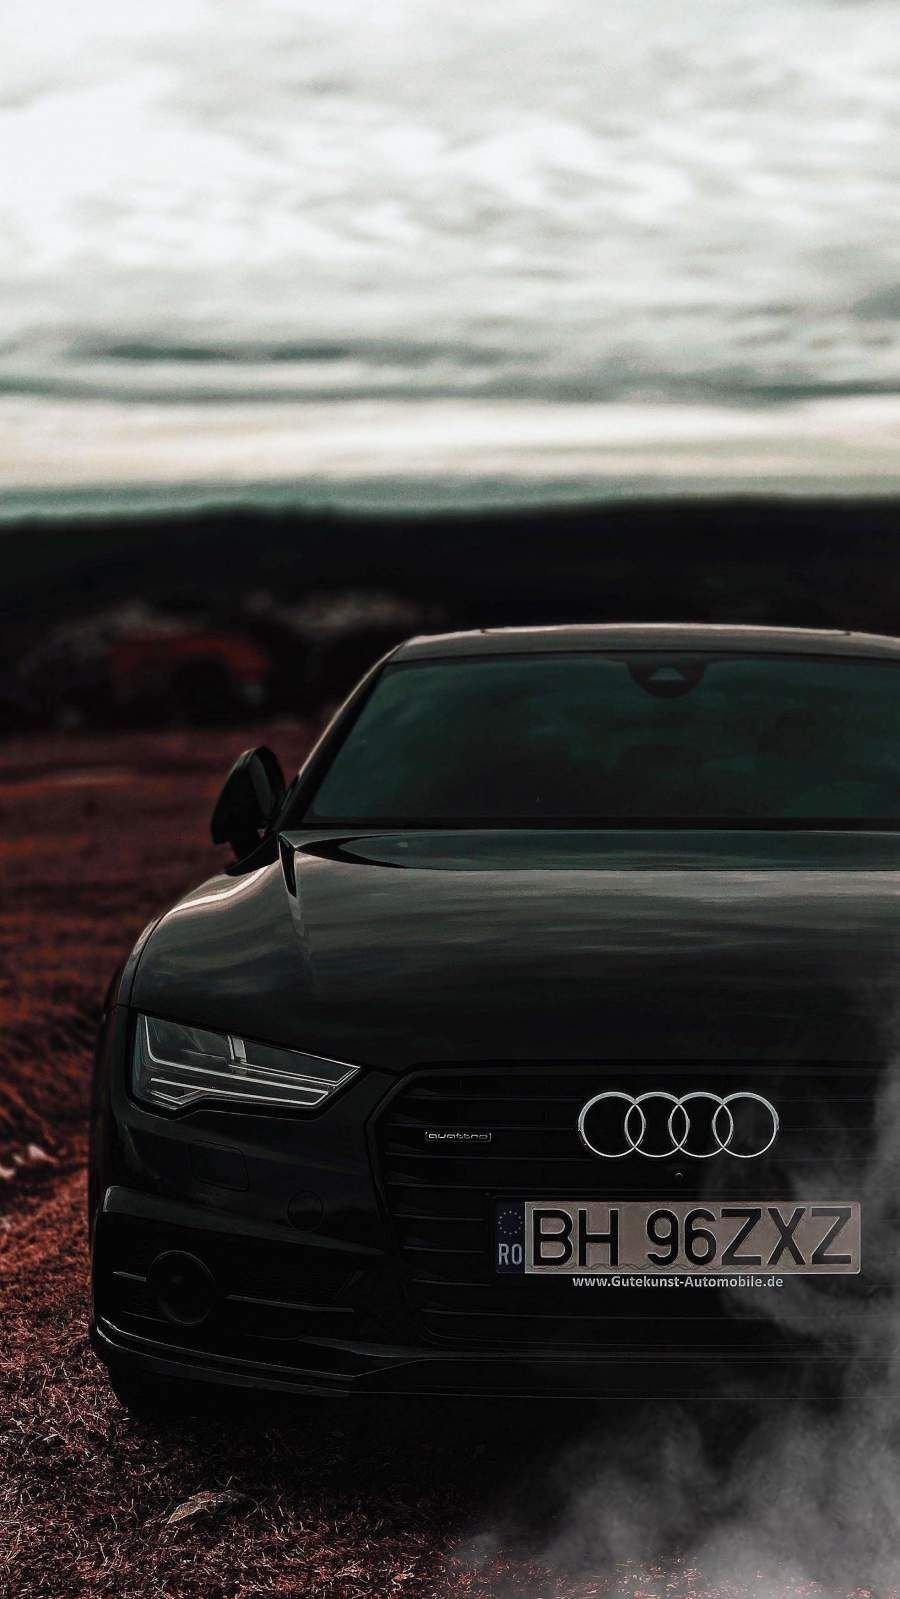 73+ Audi 4K Wallpapers: HD, 4K, 5K for PC and Mobile | Download free images  for iPhone, Android